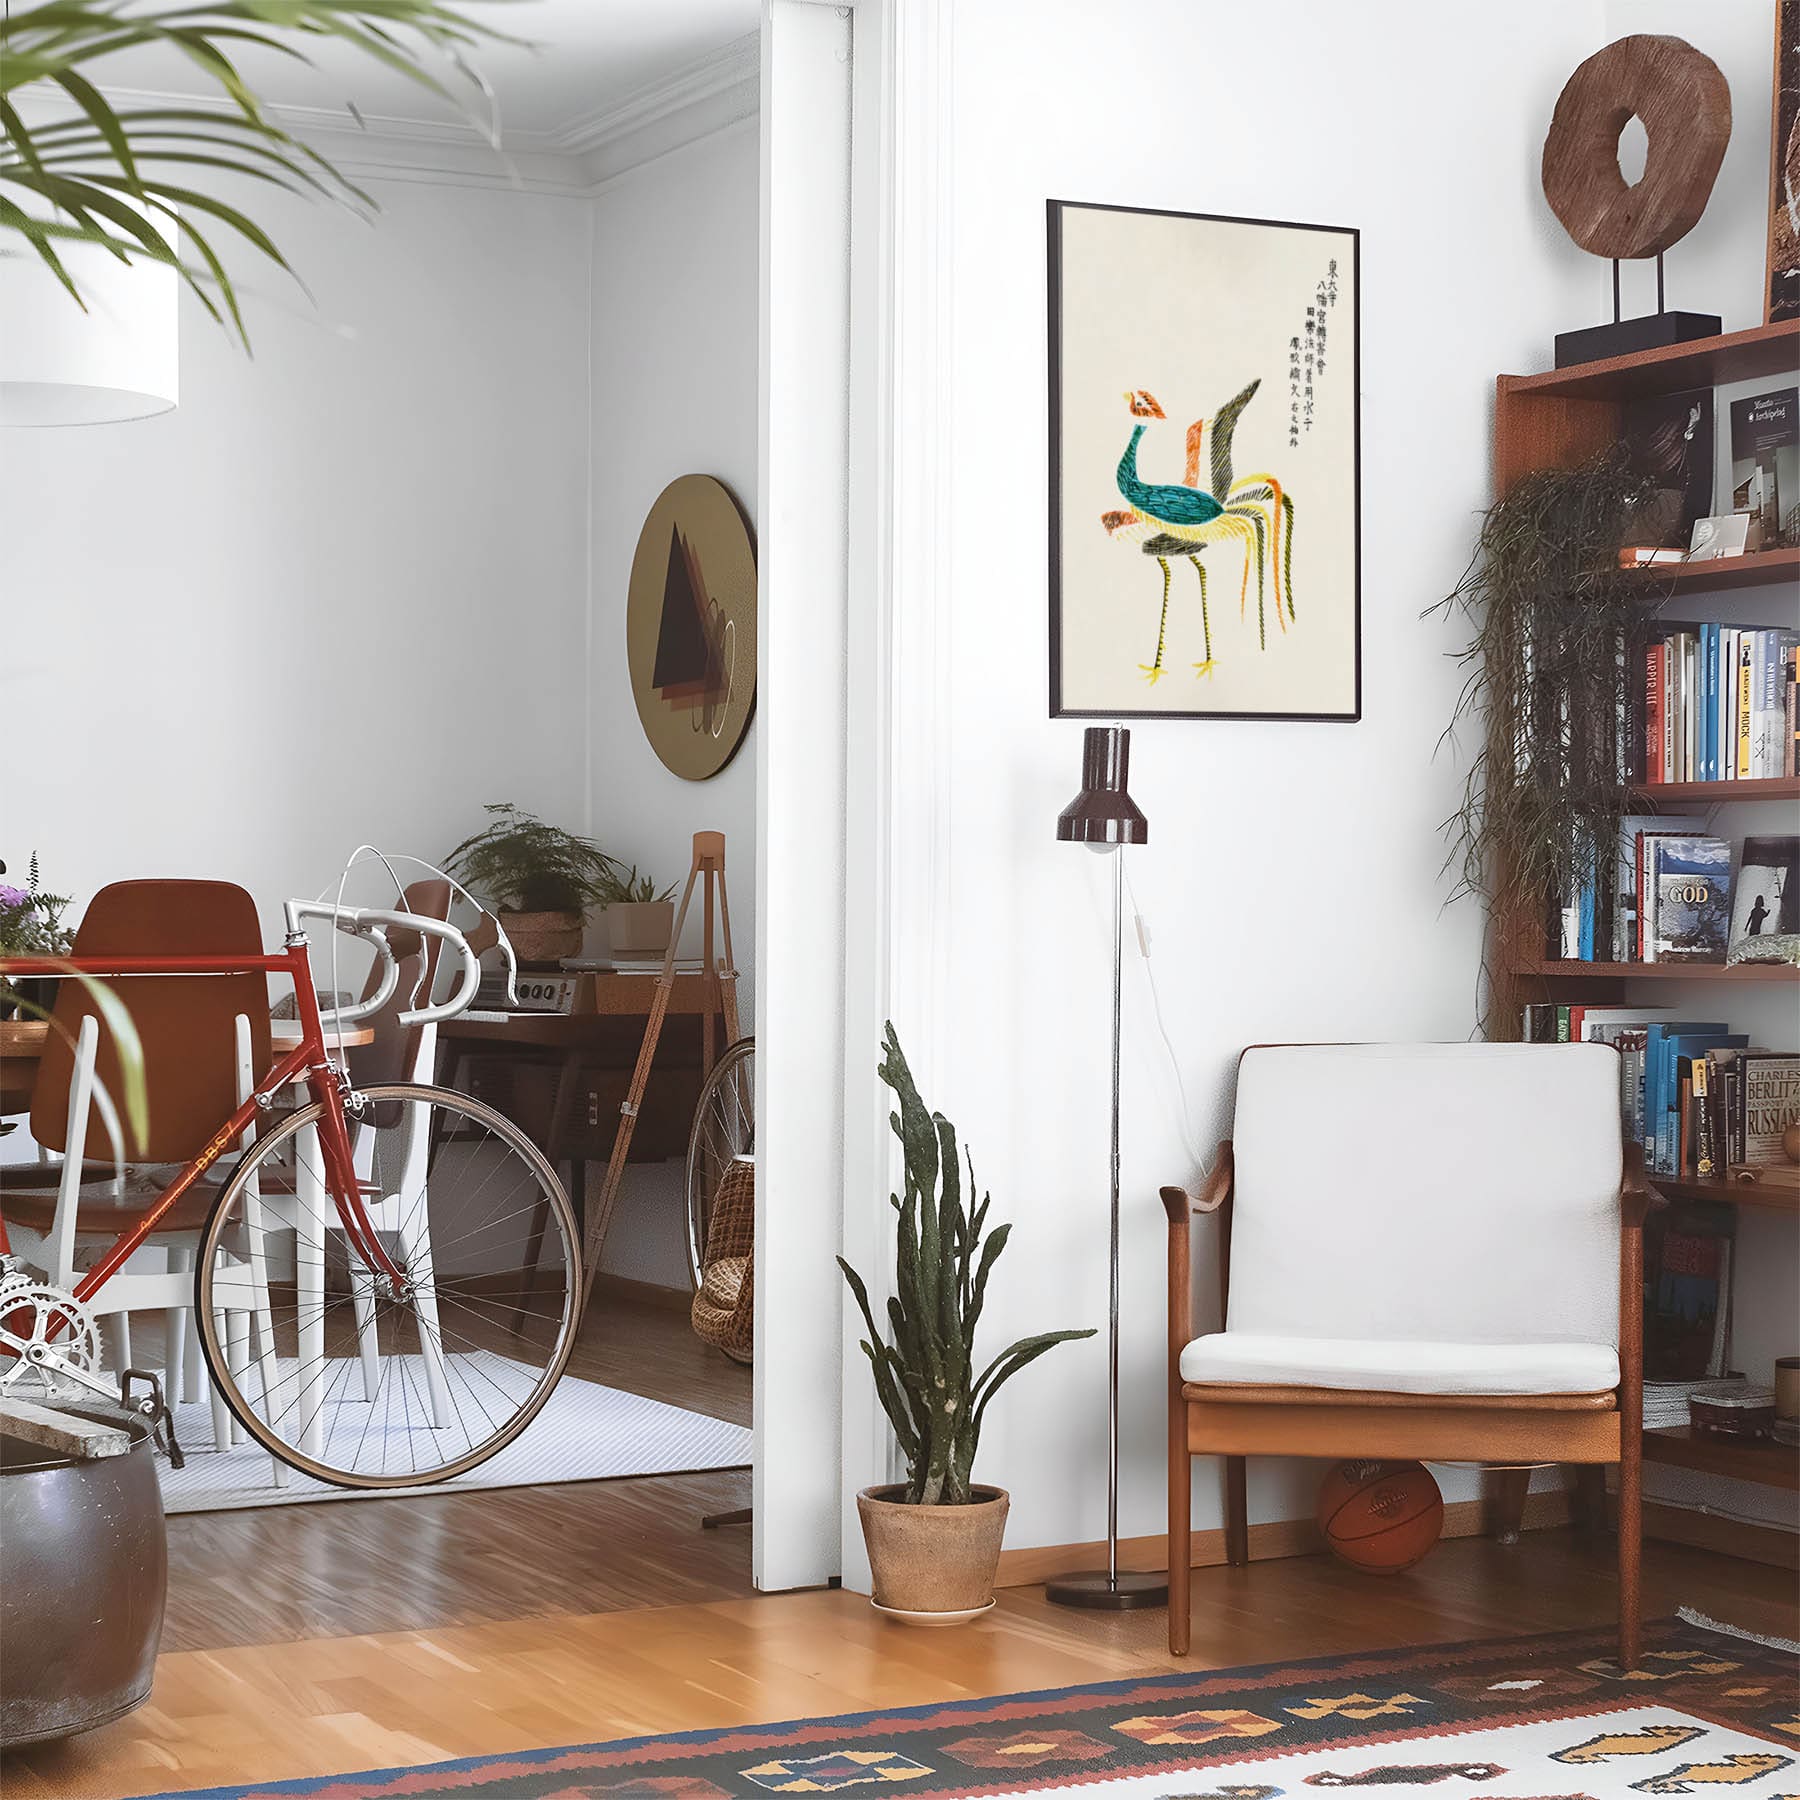 Eclectic living room with a road bike, bookshelf and house plants that features framed artwork of a Aesthetic Woodblock above a chair and lamp